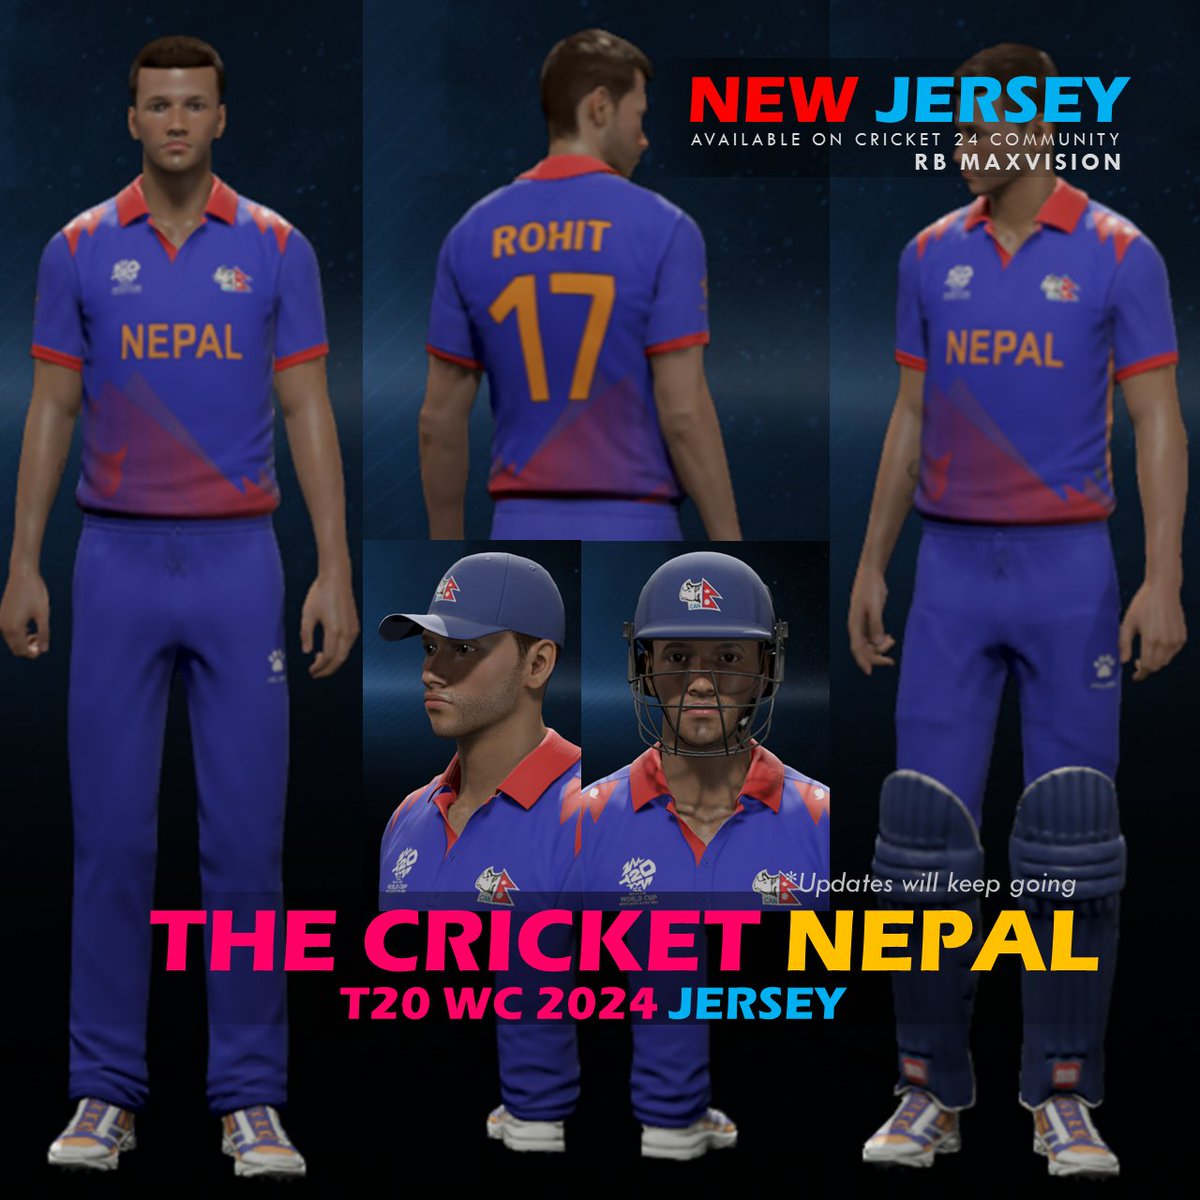 #Cricket24 | #NEPAL #TheNewJersey | T20i WC 2024 | #T20WorldCup2024 | Available on Cricket 24 Community | Academy name : RB MaxVision @AJMods99 @NepalCricket @ICC @T20WorldCup
#AJMods99 #Kelme #NepalCricket